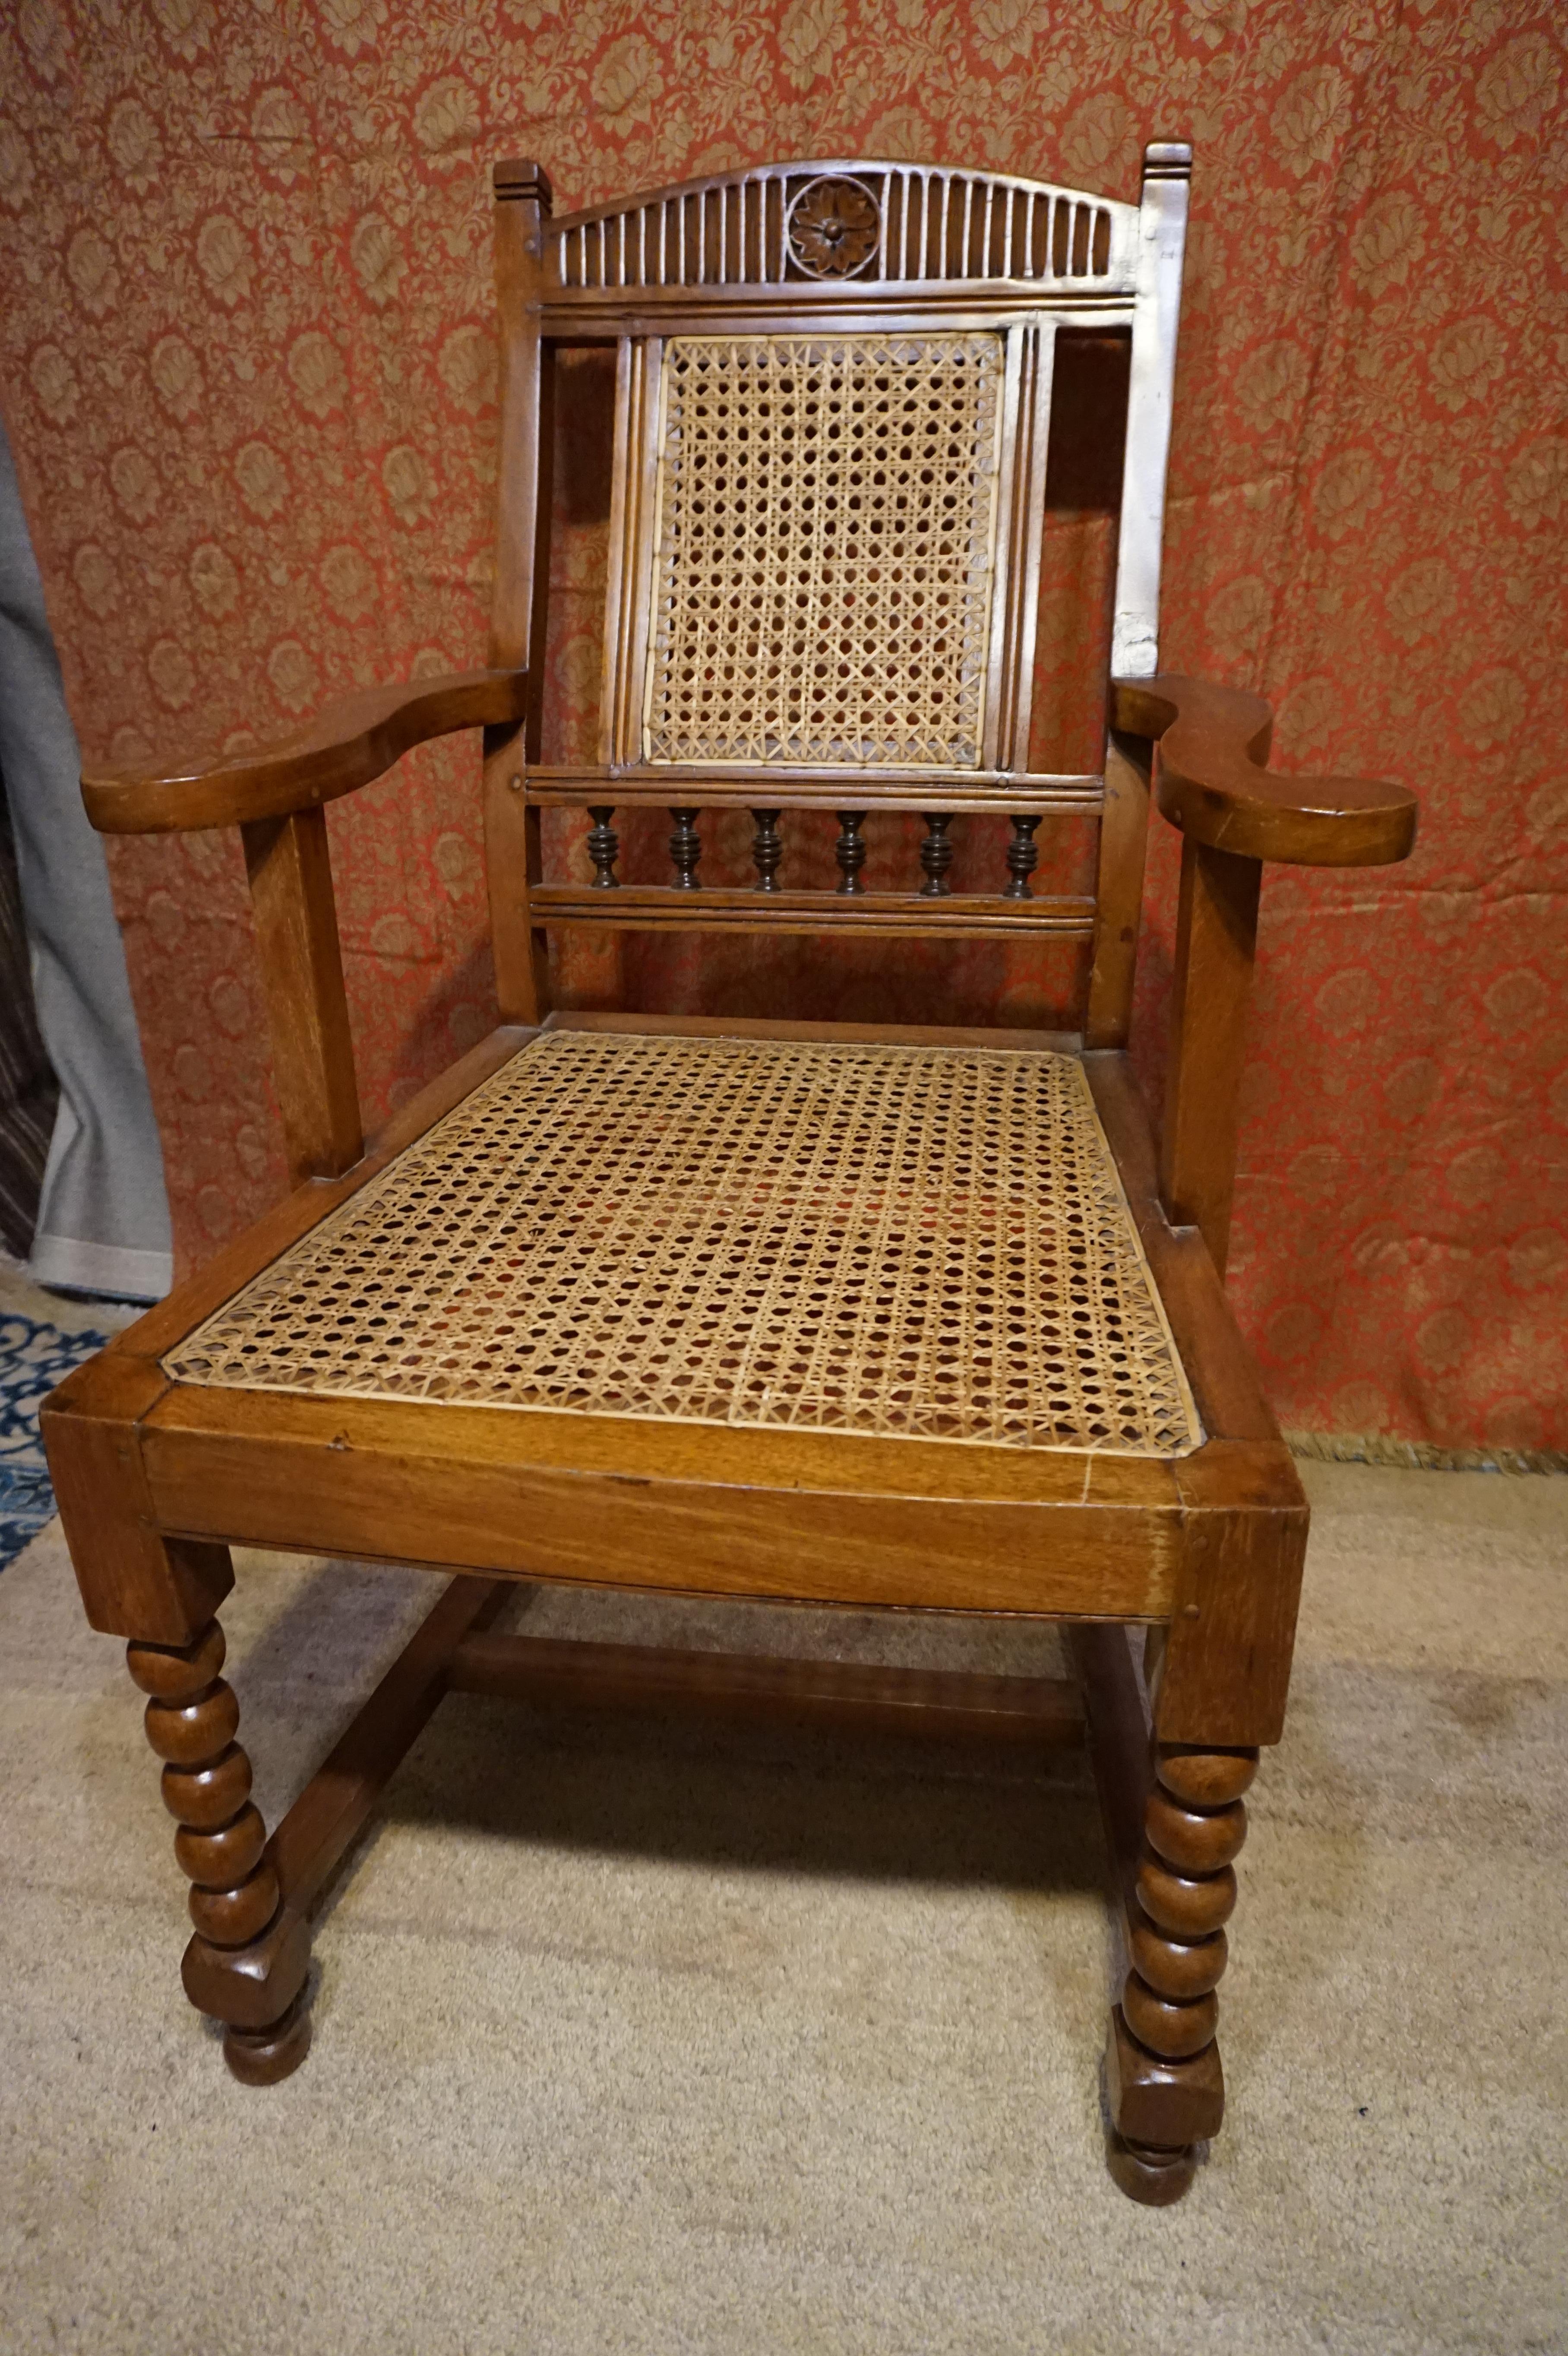 Beautifully hand carved teak armchair likely constructed for the British in India. Several elements that make it unique including scrolling arms, barley twist legs, reclining back, carved backrest, cane work etc. Wonderful patina. Sturdy but one leg